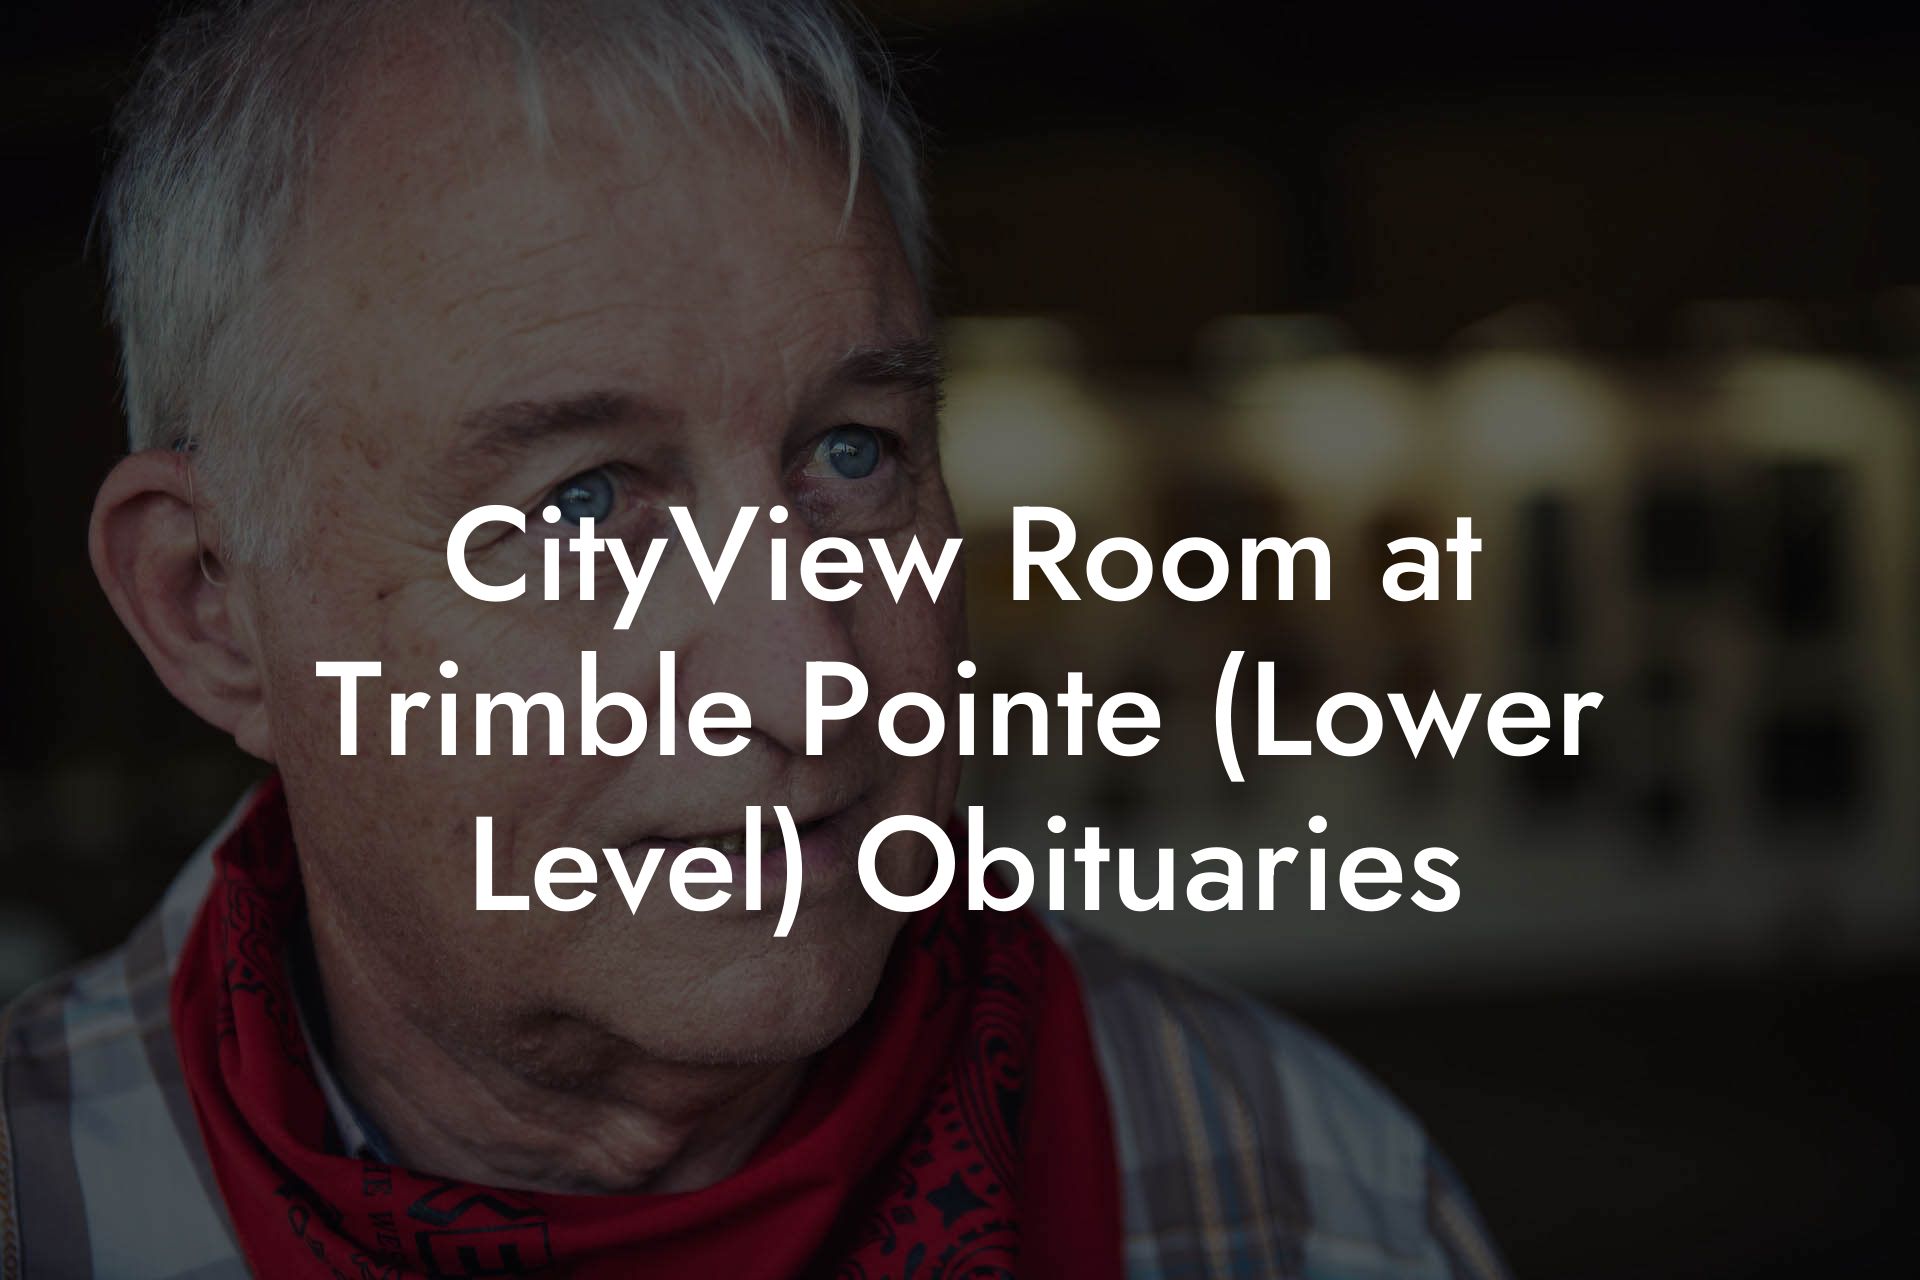 CityView Room at Trimble Pointe (Lower Level) Obituaries